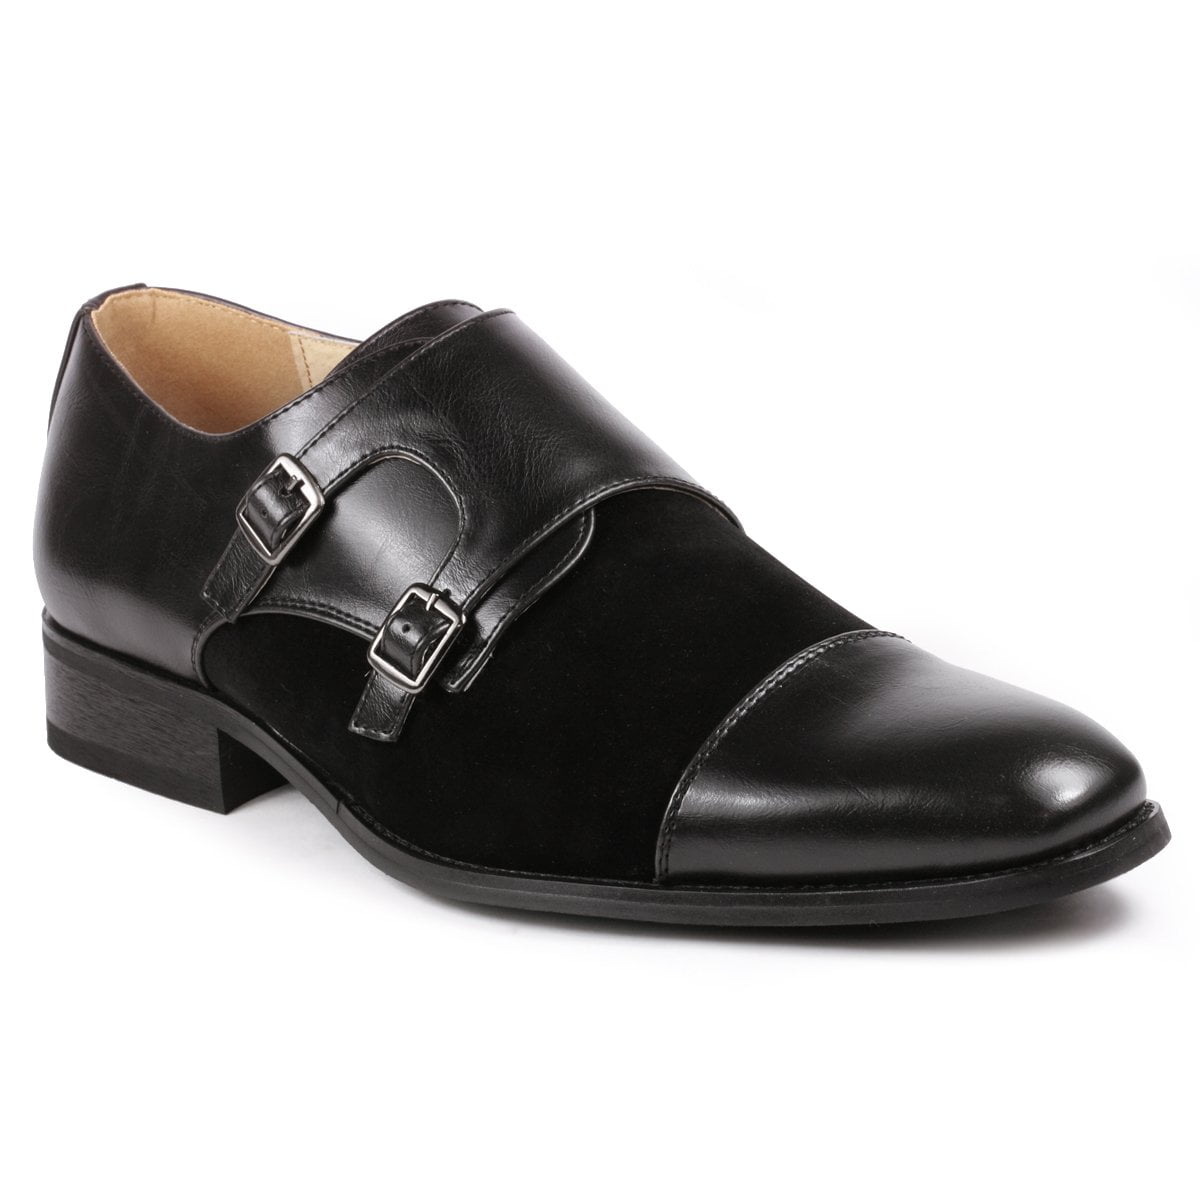 FARYM Mens Double-Strap Monk Shoes Formal Oxfords in Black Leather